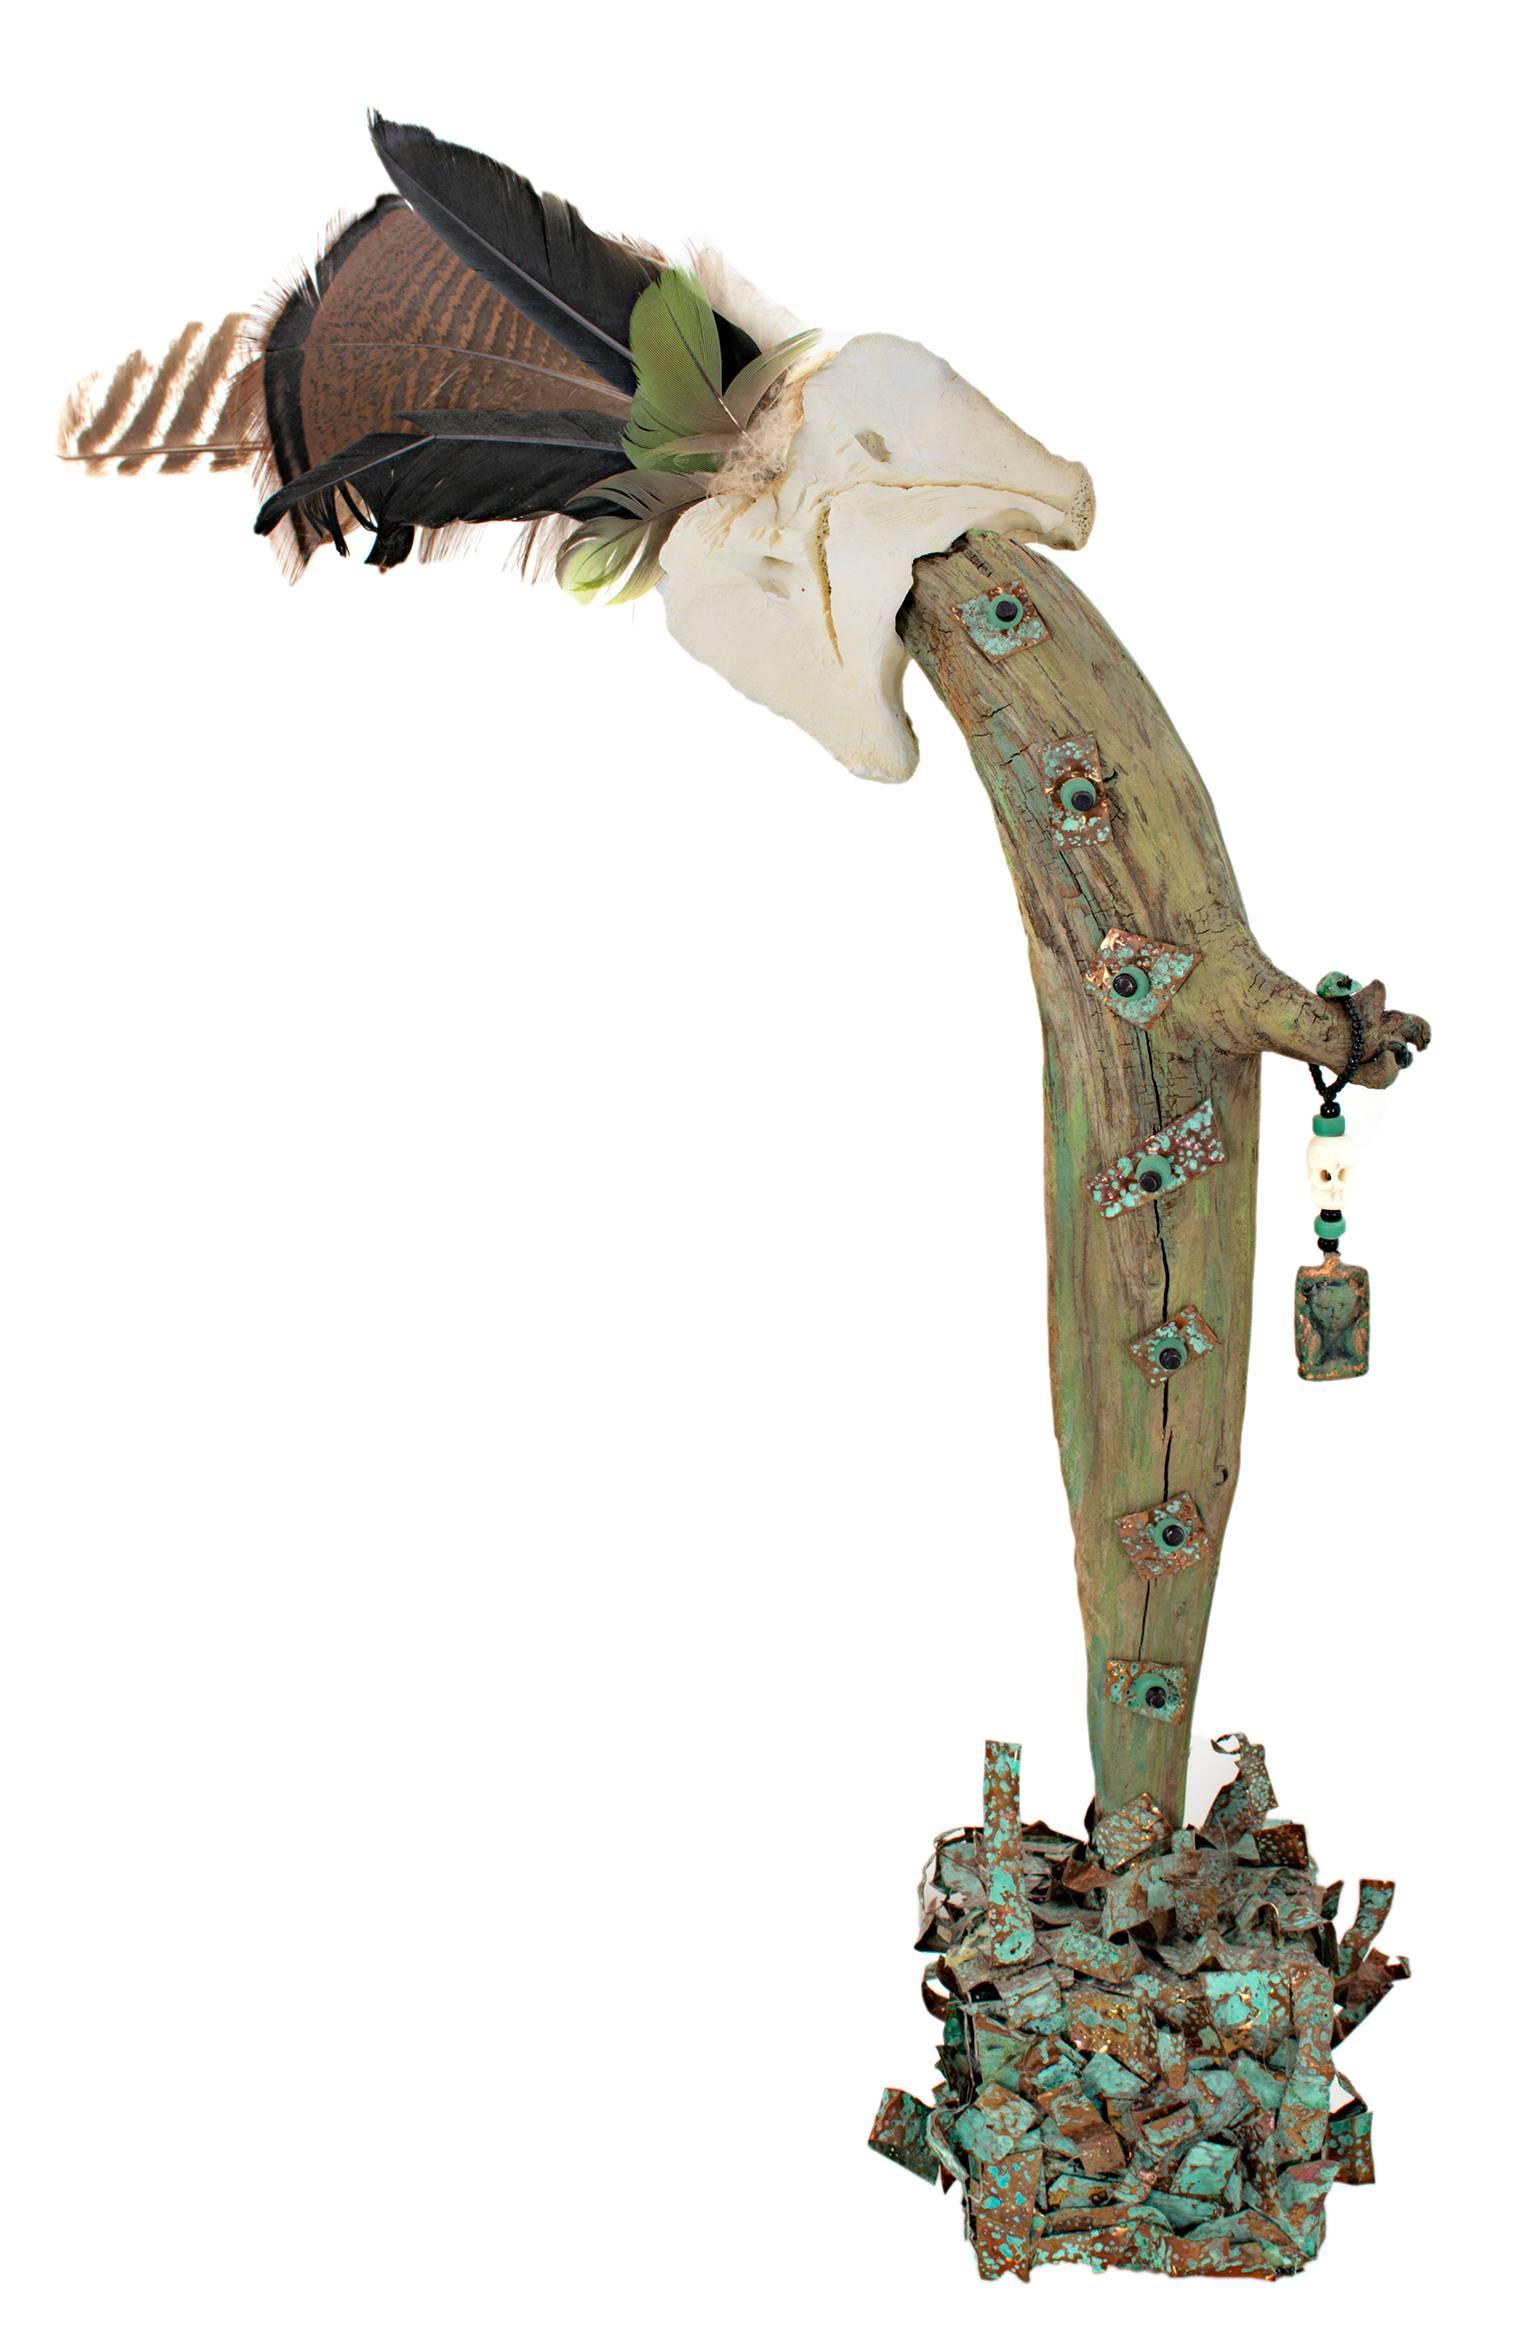 "The Guardian" is an original sculpture by Kyle Zubatsky. It was constructed out of juniper wood, copper, beads, bone, and feathers, and was signed by the artist. The piece represents an abstracted human figure, perhaps the kind found in stories of